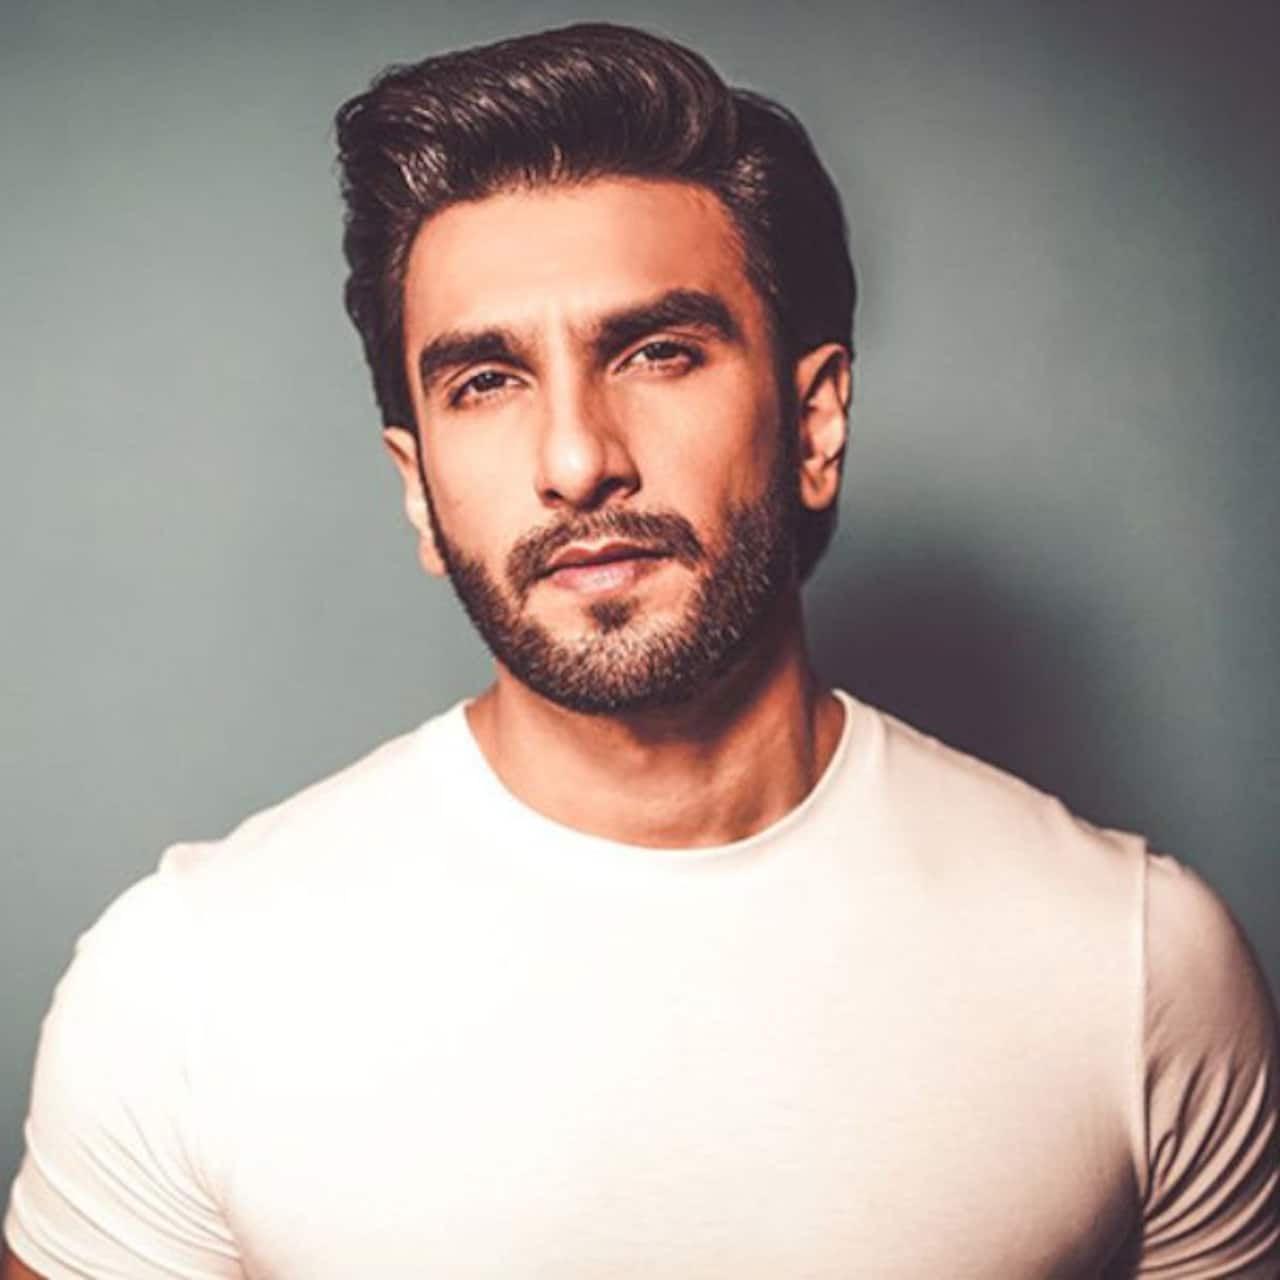 Ranveer Singh to part ways from YRF talent management agency that made him a star? Here's what we know